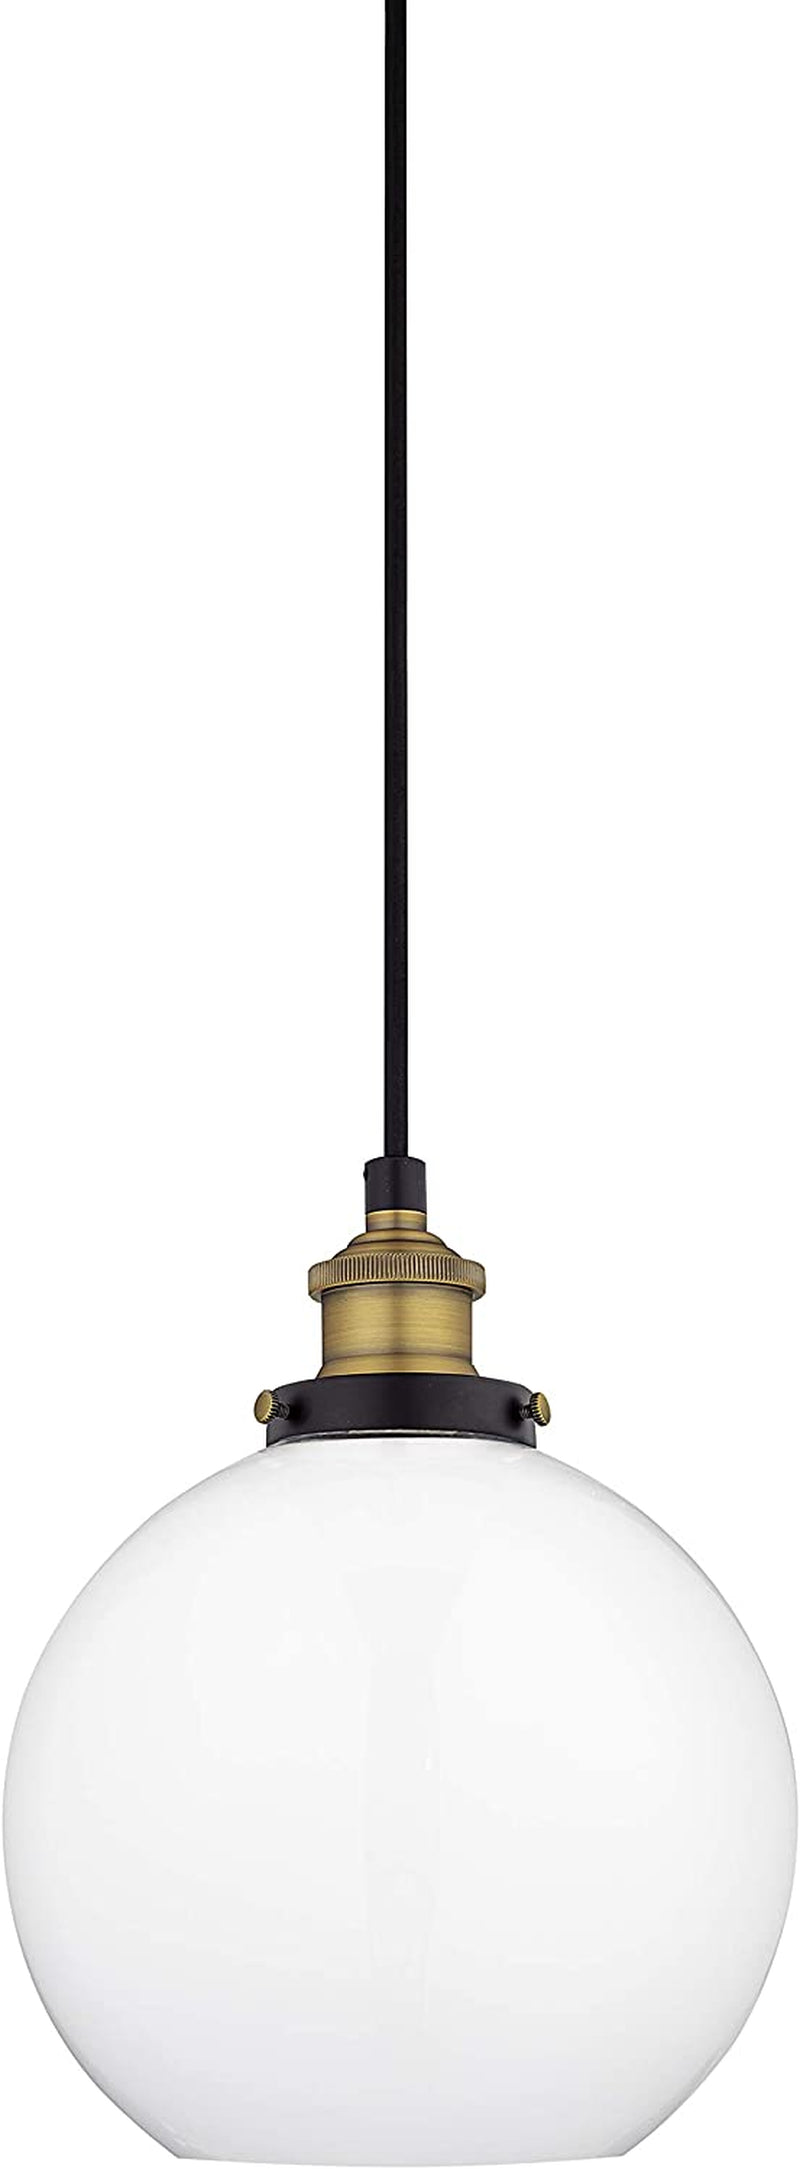 Linea Di Liara Primo Large Black and Gold Glass Globe Pendant Light Fixture Farmhouse Pendant Lighting for Kitchen Island Mid Century Modern Ceiling Light Clear Glass Shade, UL Listed Home & Garden > Lighting > Lighting Fixtures Linea di Liara Black/Brass Milk Glass 